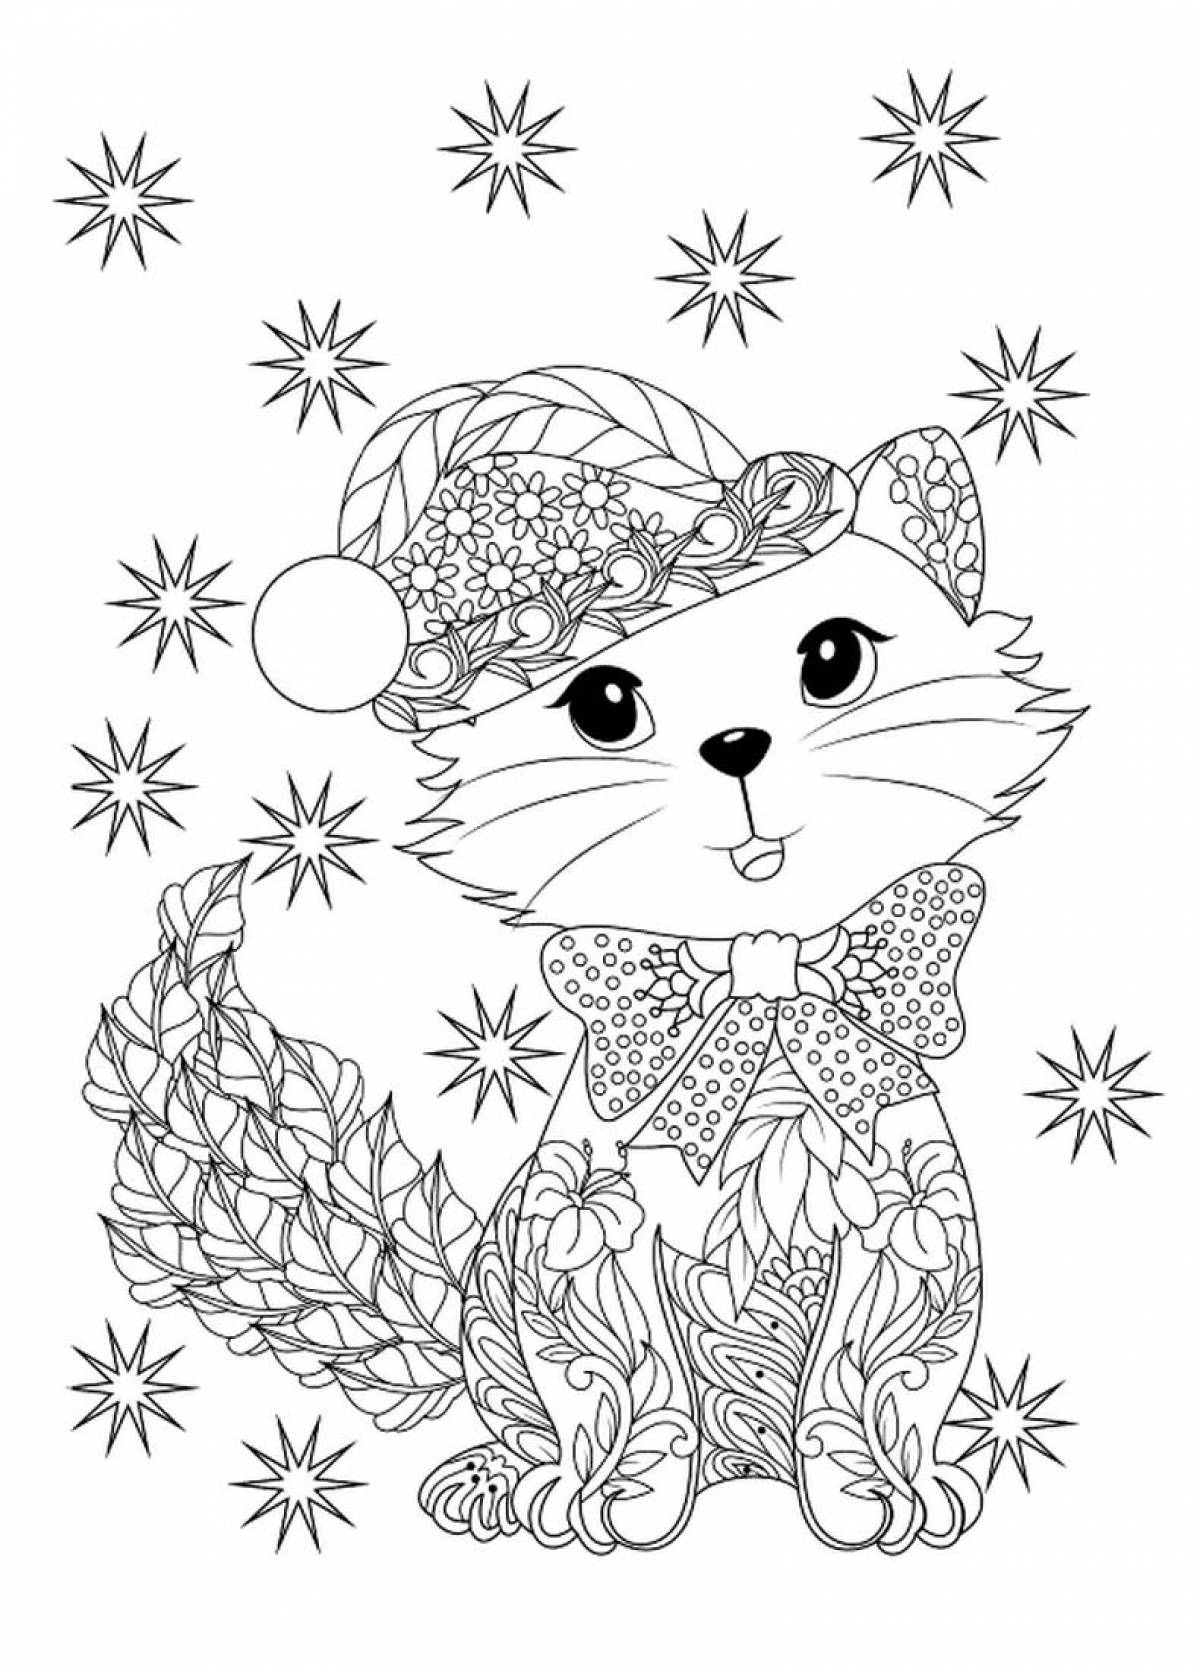 Delightful anti-stress Christmas coloring book